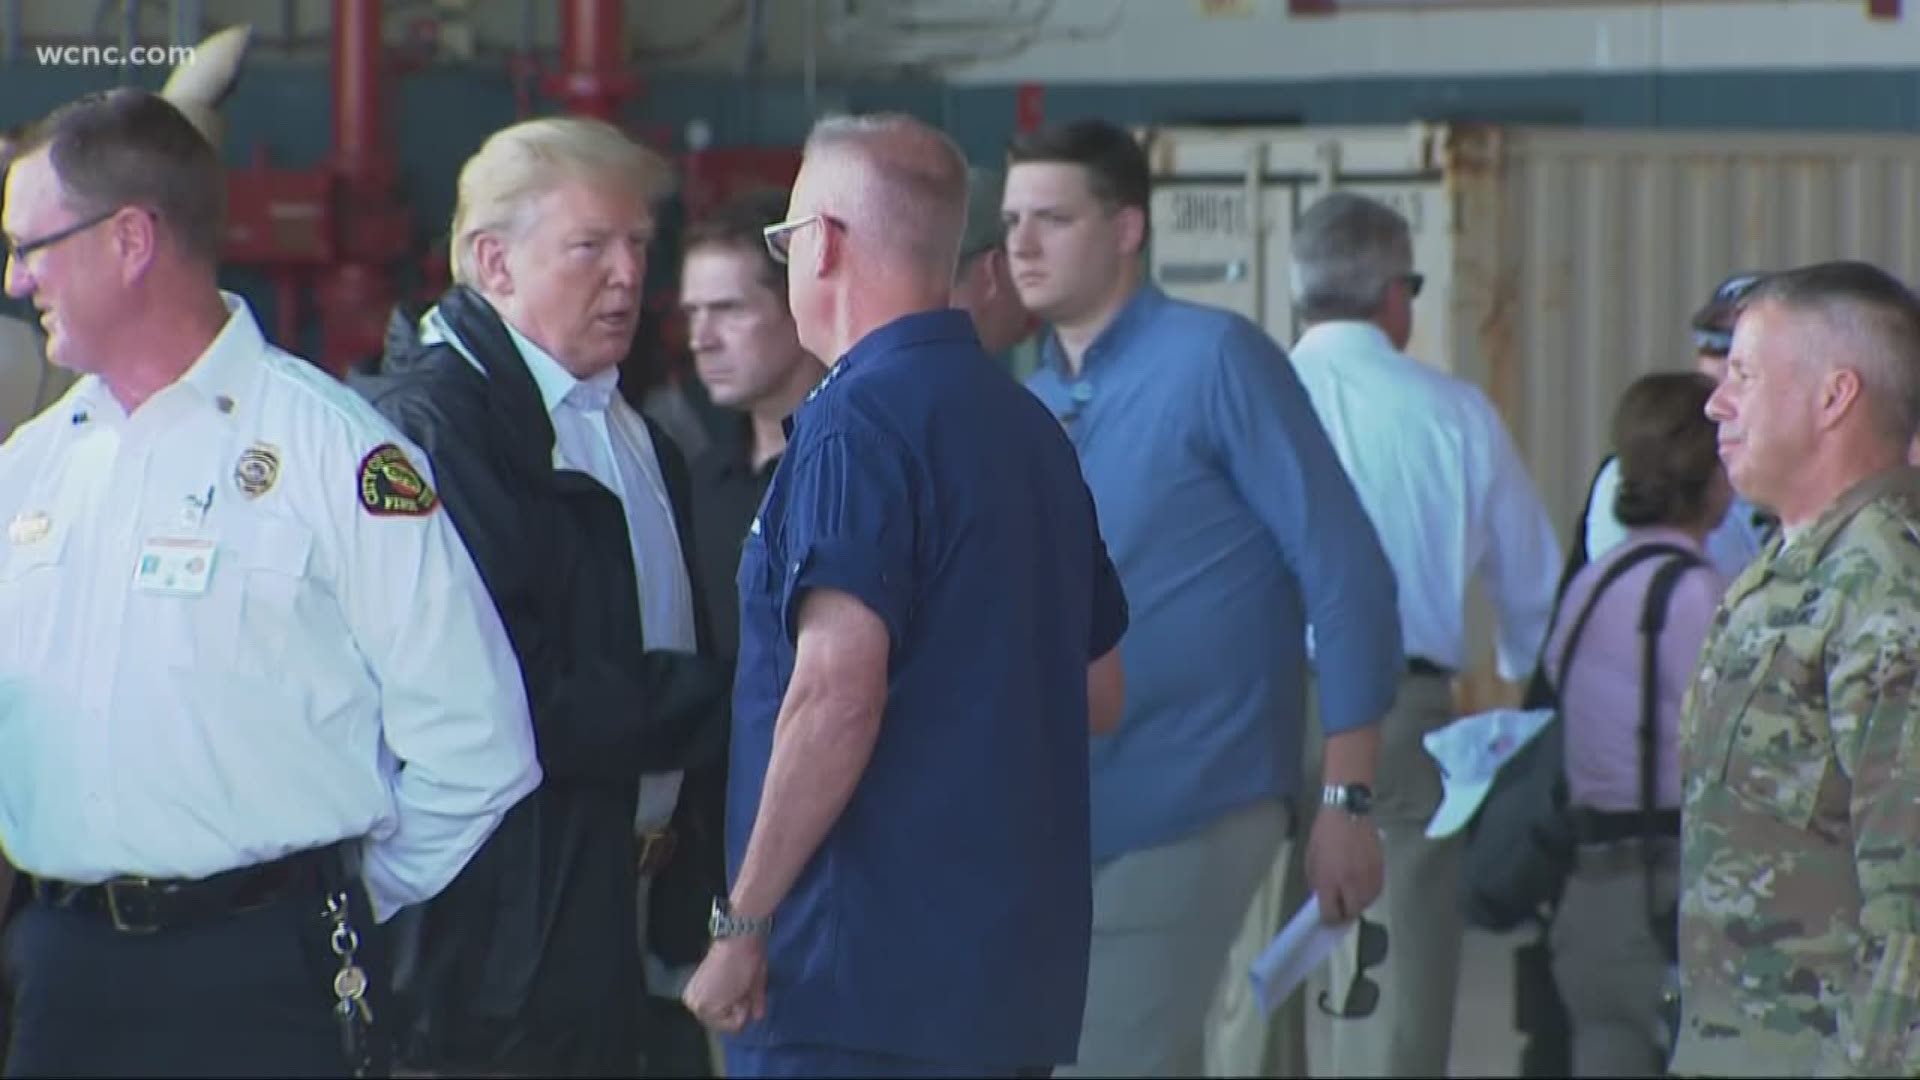 Handing out hot dogs, hugs and comforting words, President Donald Trump sought Wednesday to soothe those who suffered losses in Hurricane Florence, declaring that "America grieves for you" as he surveyed damage the powerful storm left behind.